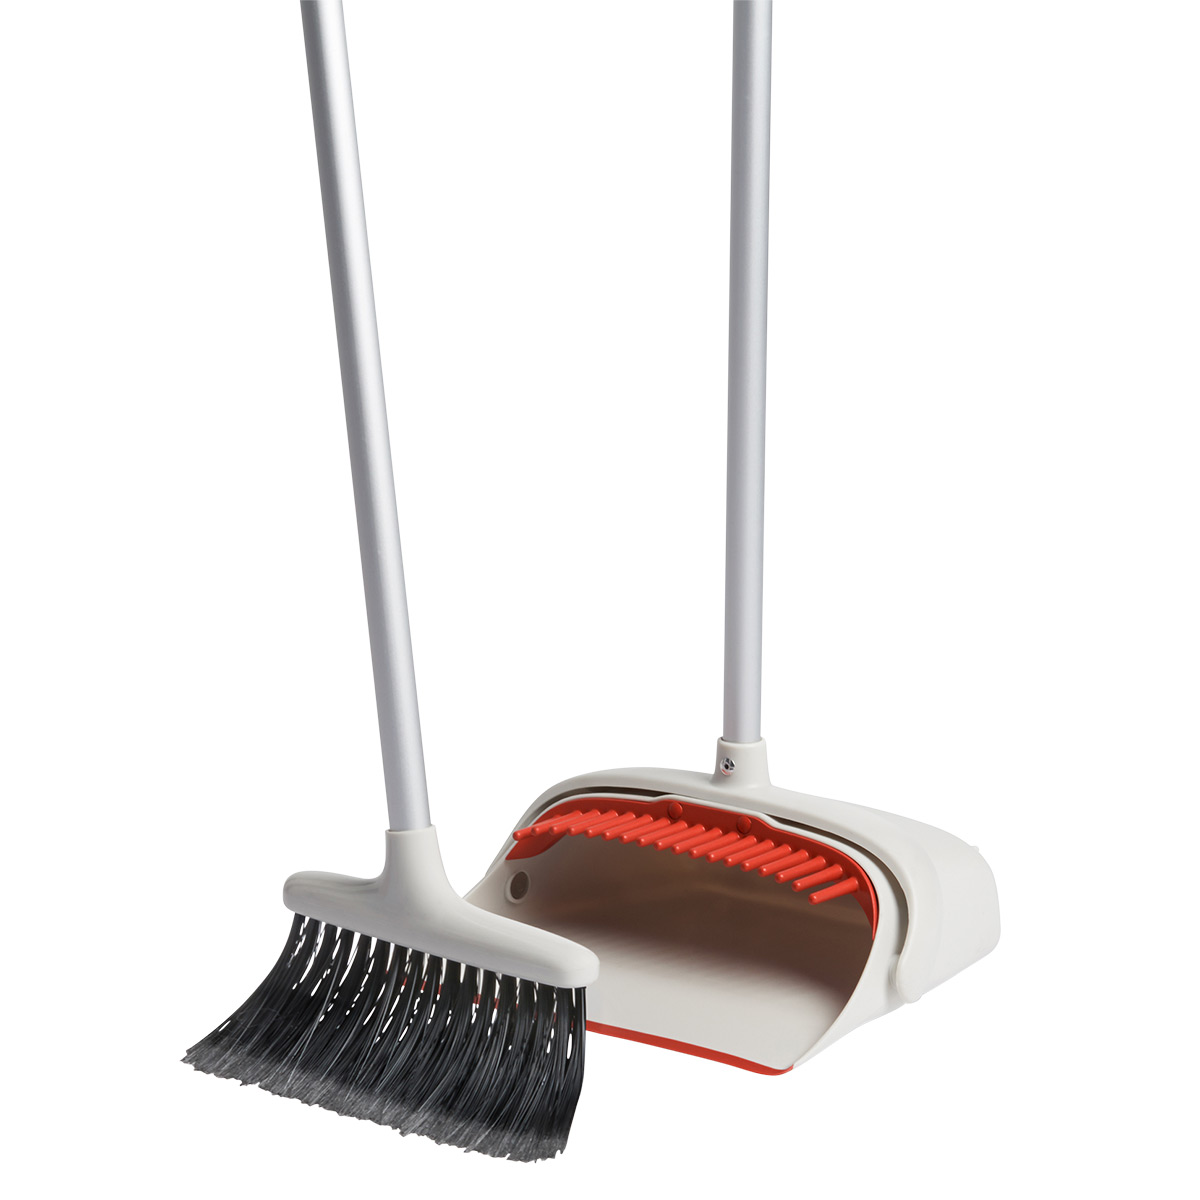 https://www.containerstore.com/catalogimages/517101/10080971-OXO-Upright-Sweep-Set-VEN5.jpg